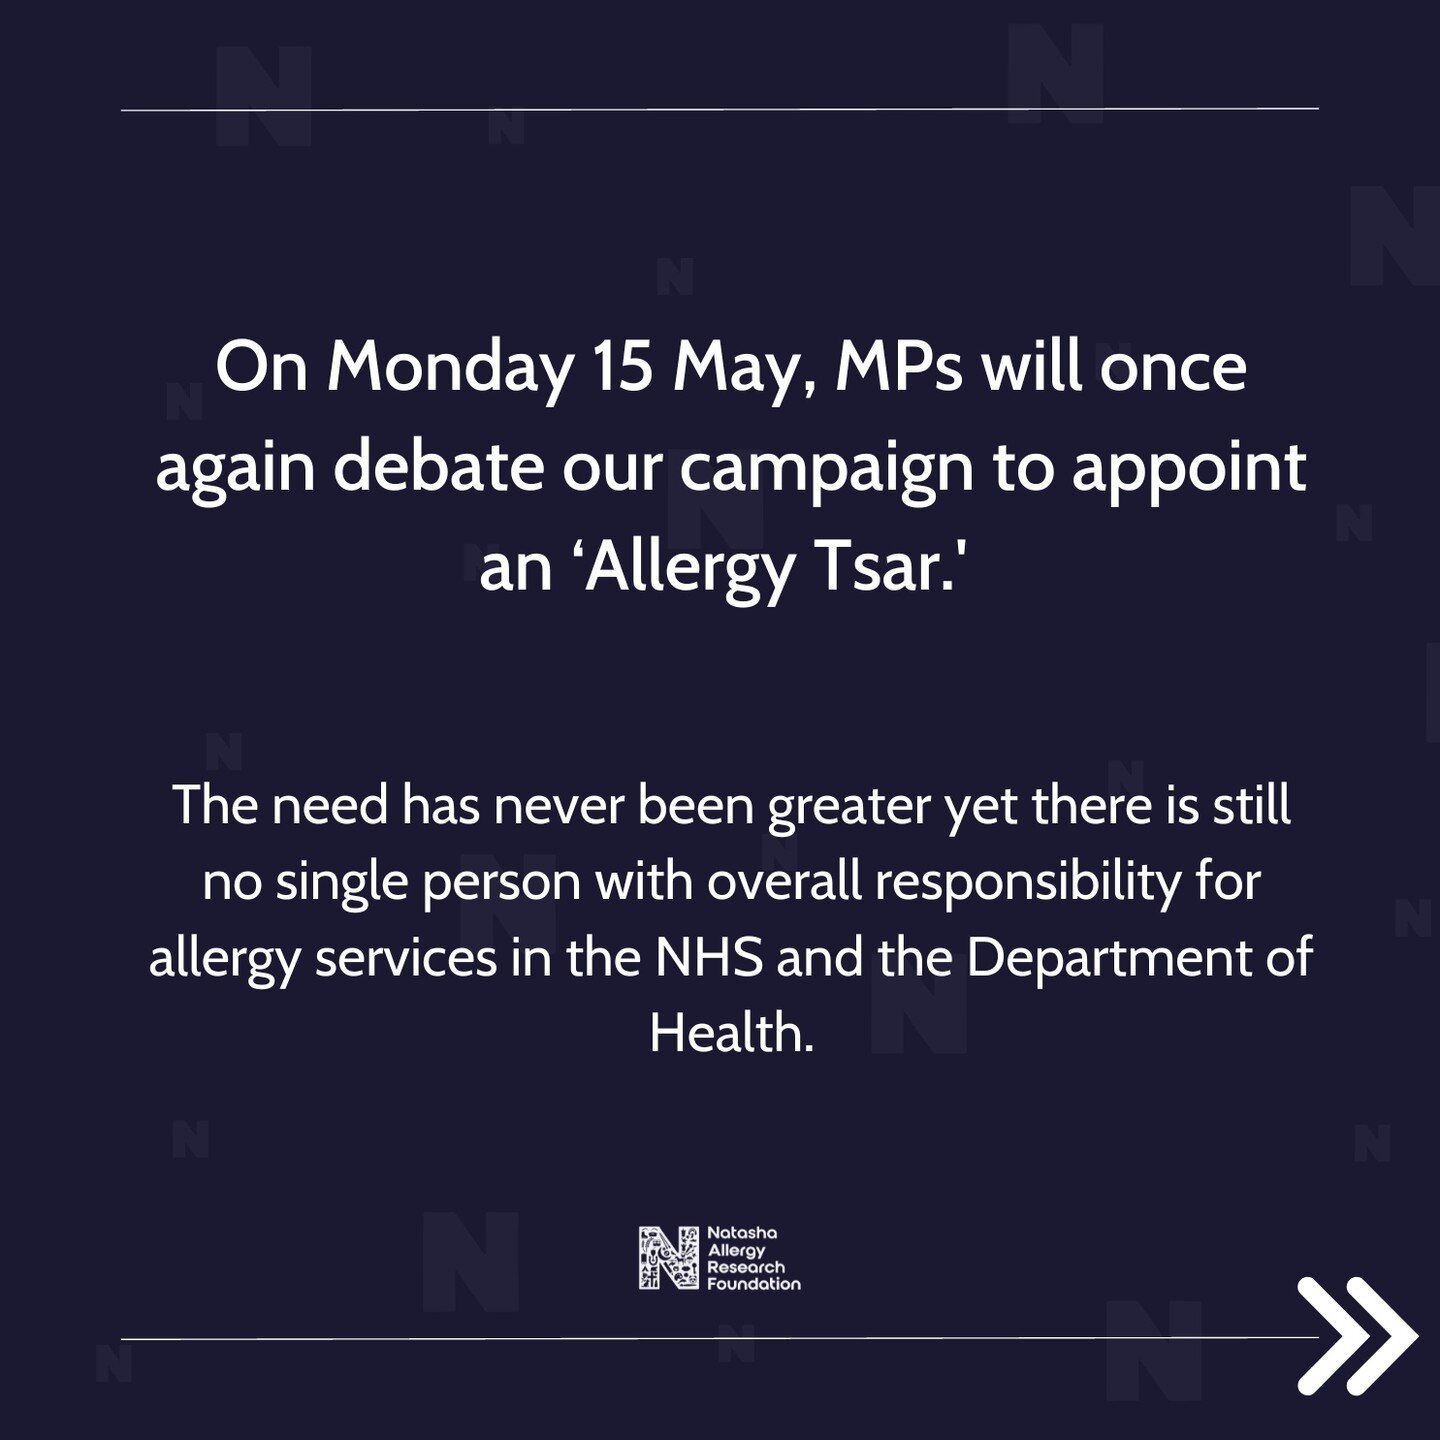 📣 On Monday 15 May, MPs will once again debate our campaign to appoint an &lsquo;Allergy Tsar.'

The need has never been greater yet there is still no single person with overall responsibility for allergy services in the NHS and the Department of He